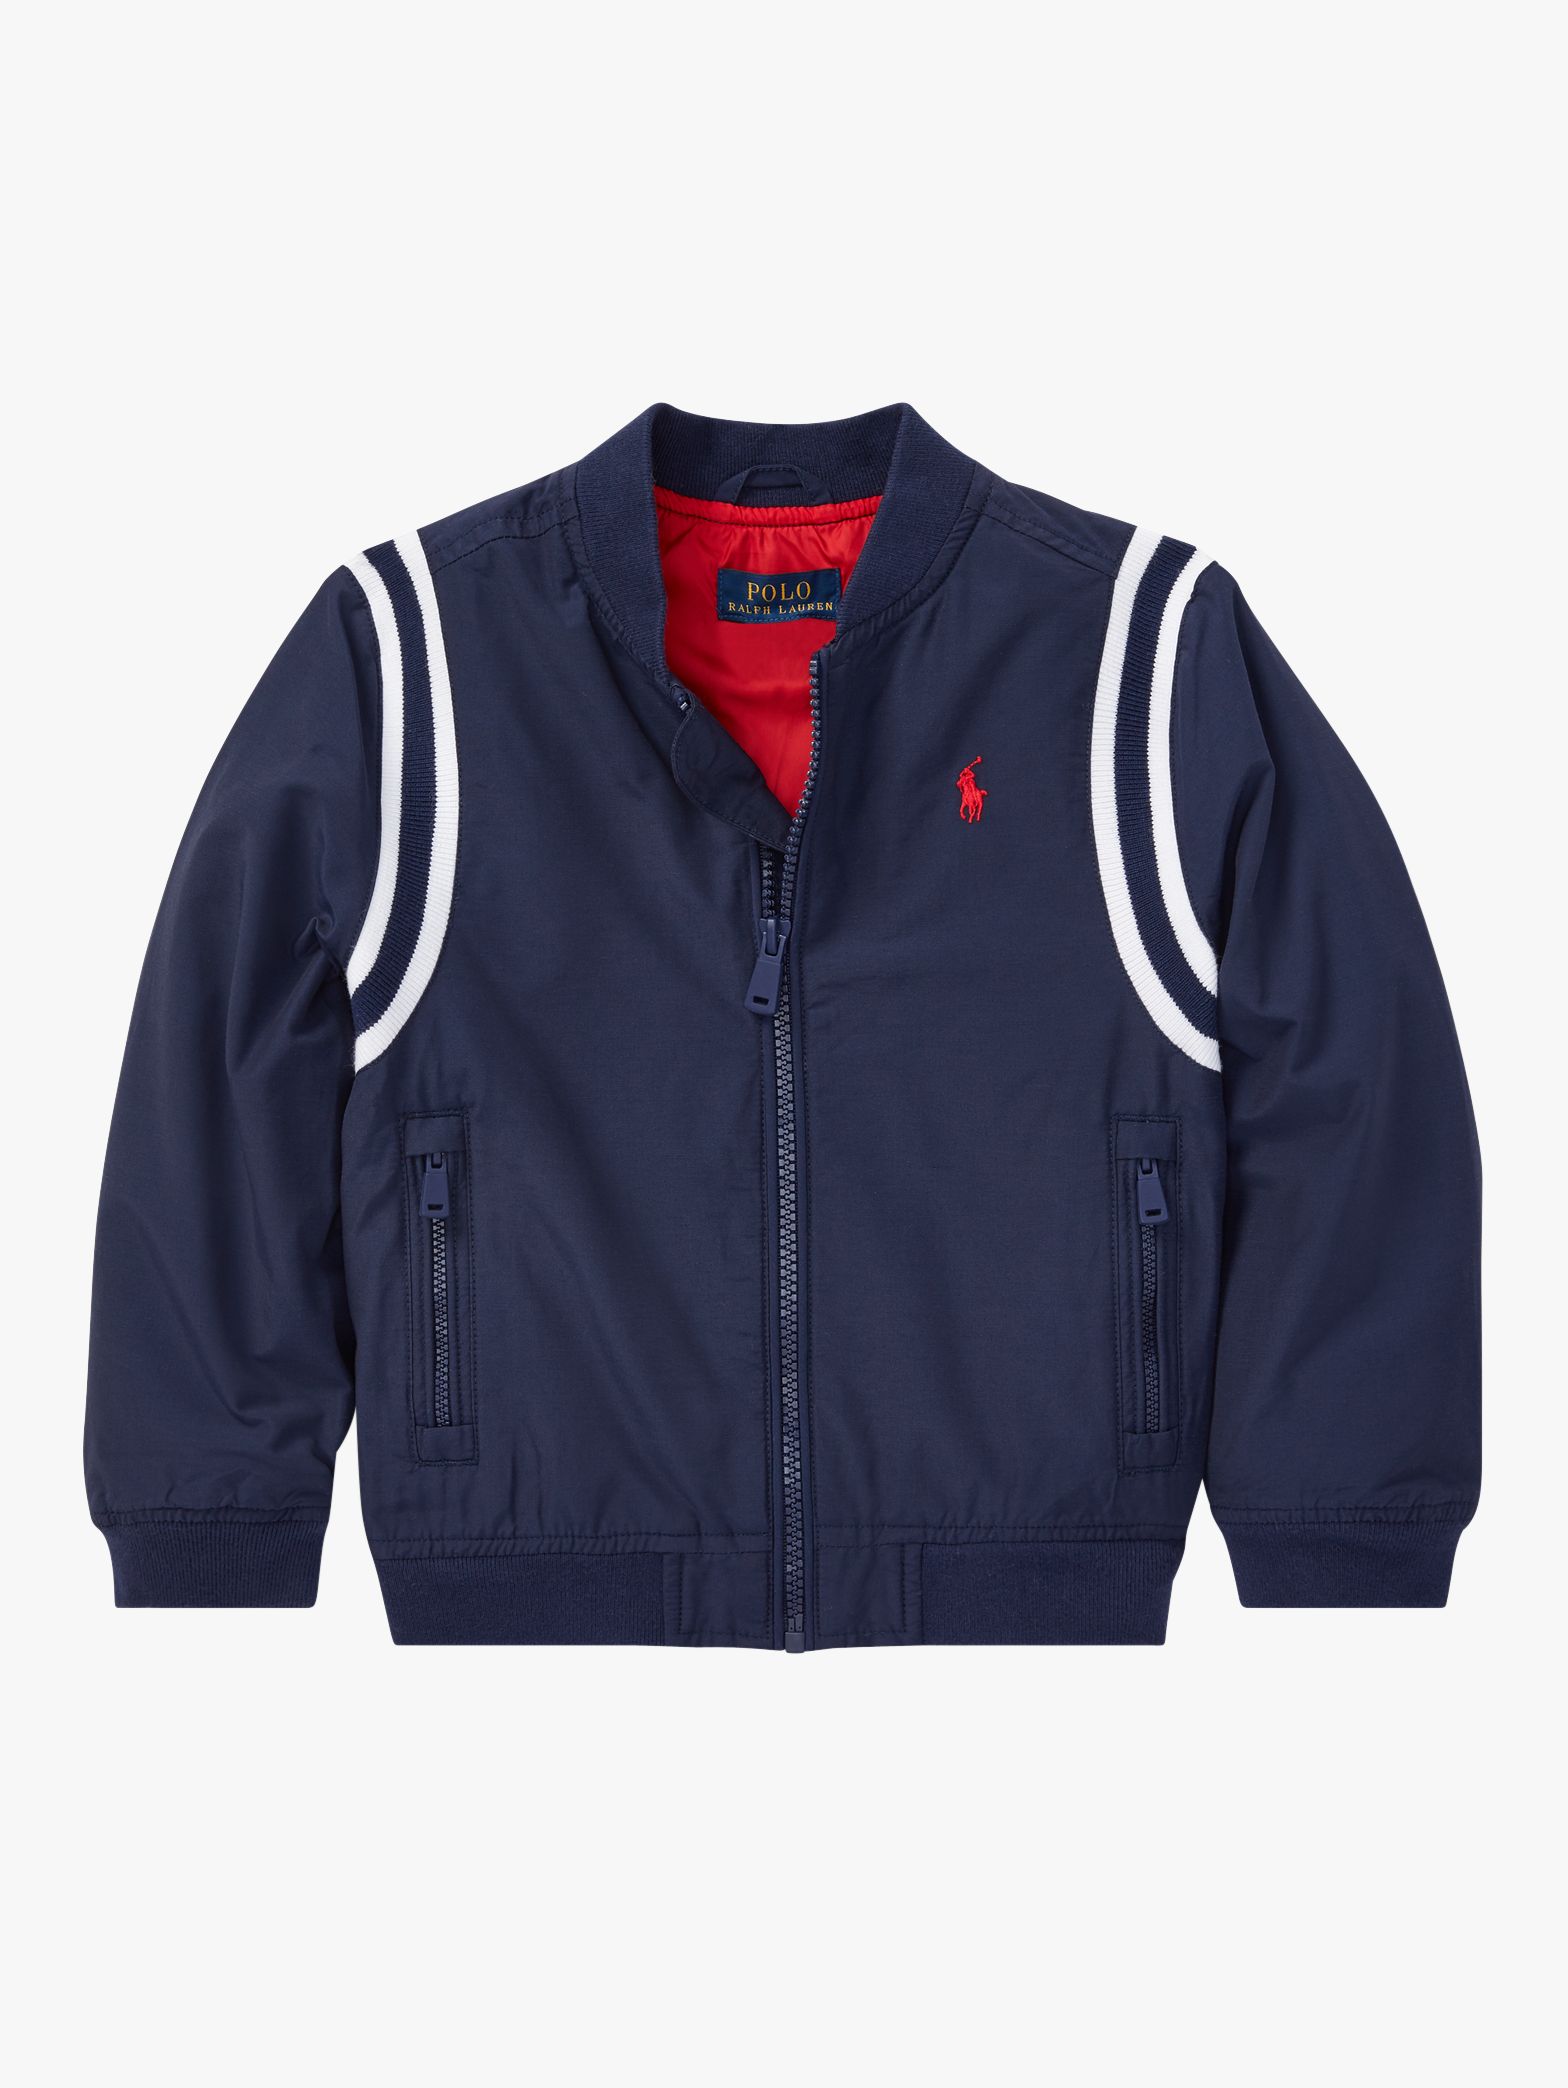 polo jackets for toddlers